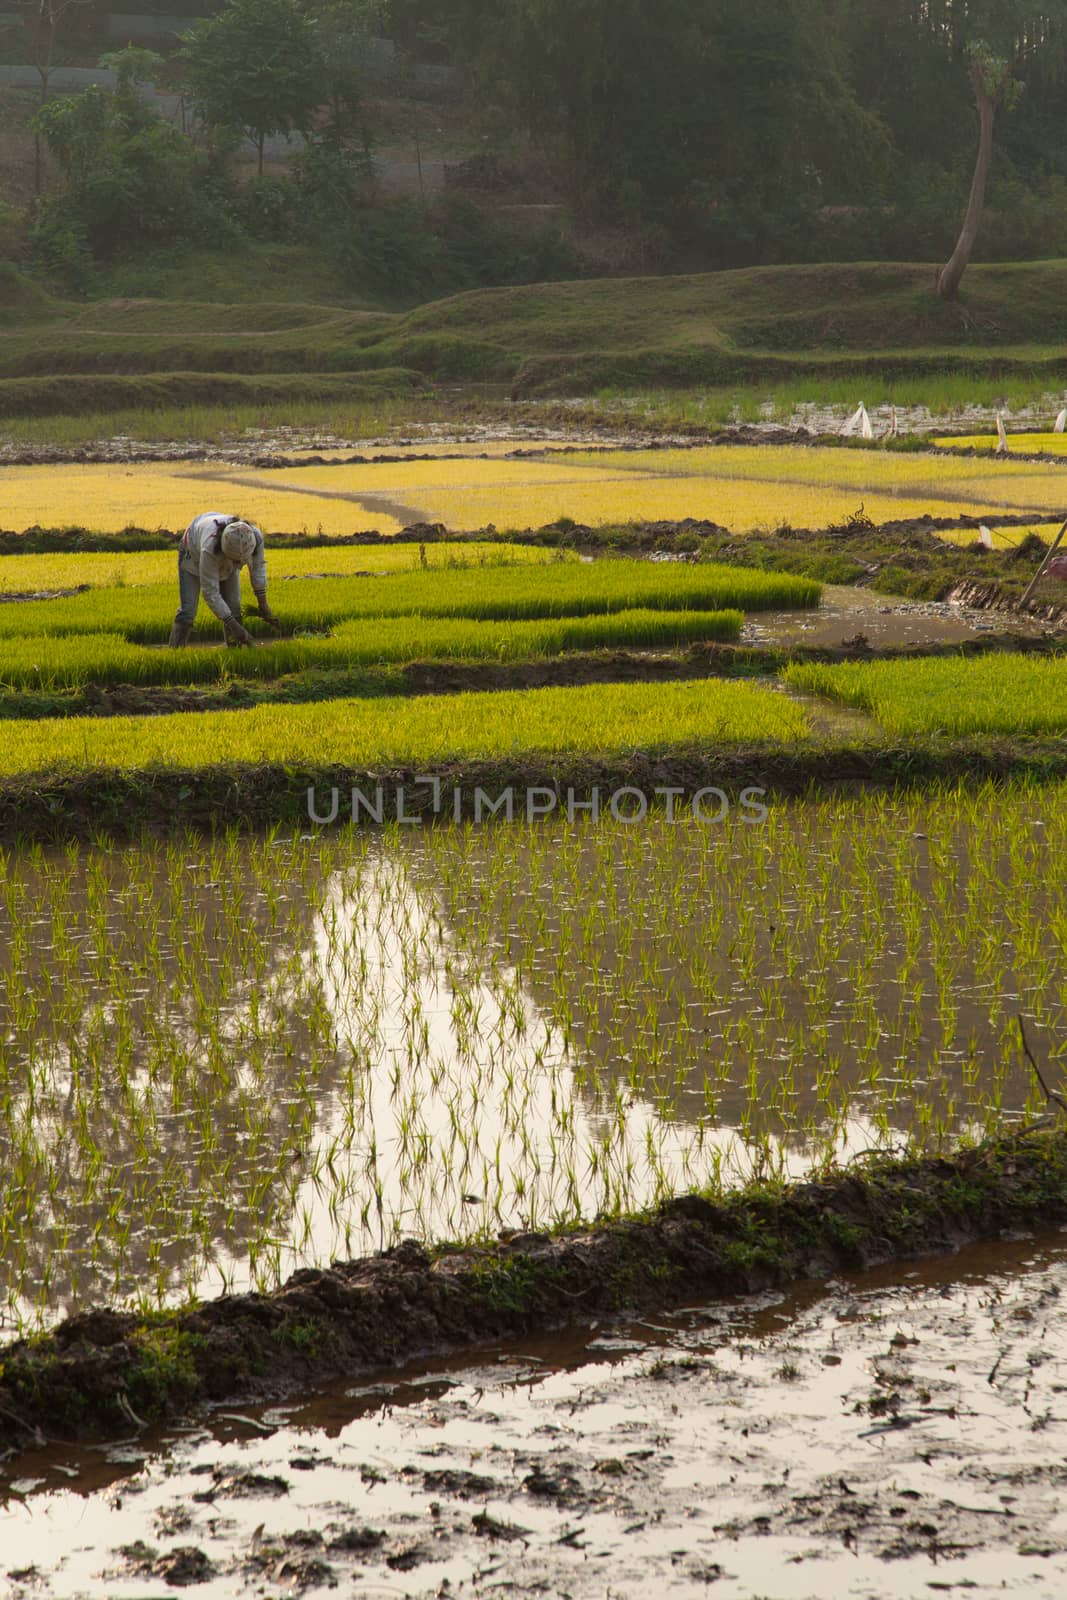 Duong Lam Vietnam 22/12/2013 fields or paddys with rice growing in open farmland by kgboxford